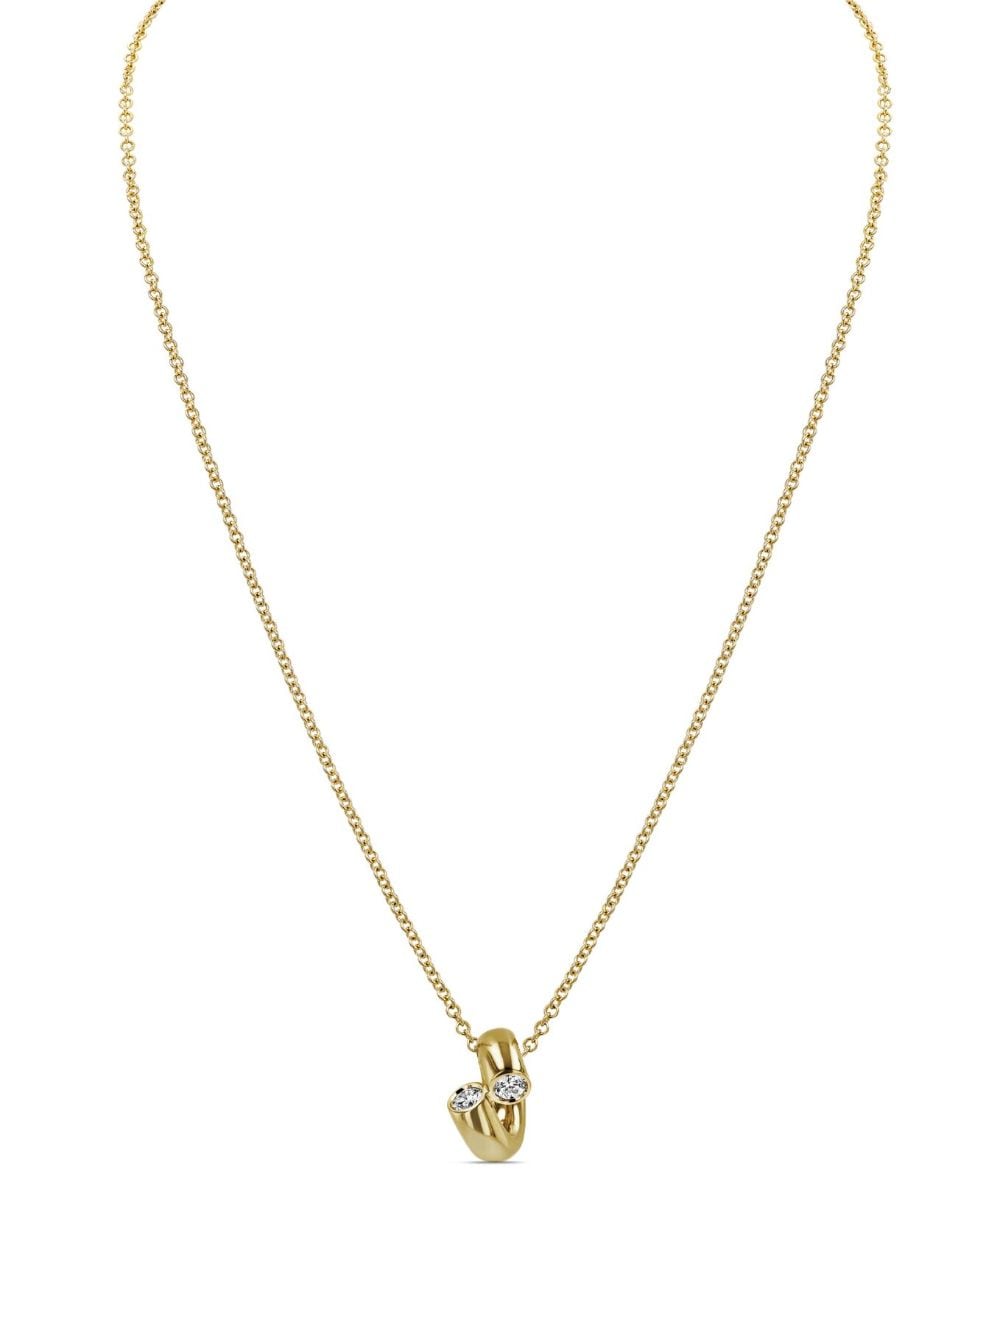 Pragnell 18kt Yellow Gold Eclipse Spring Necklace